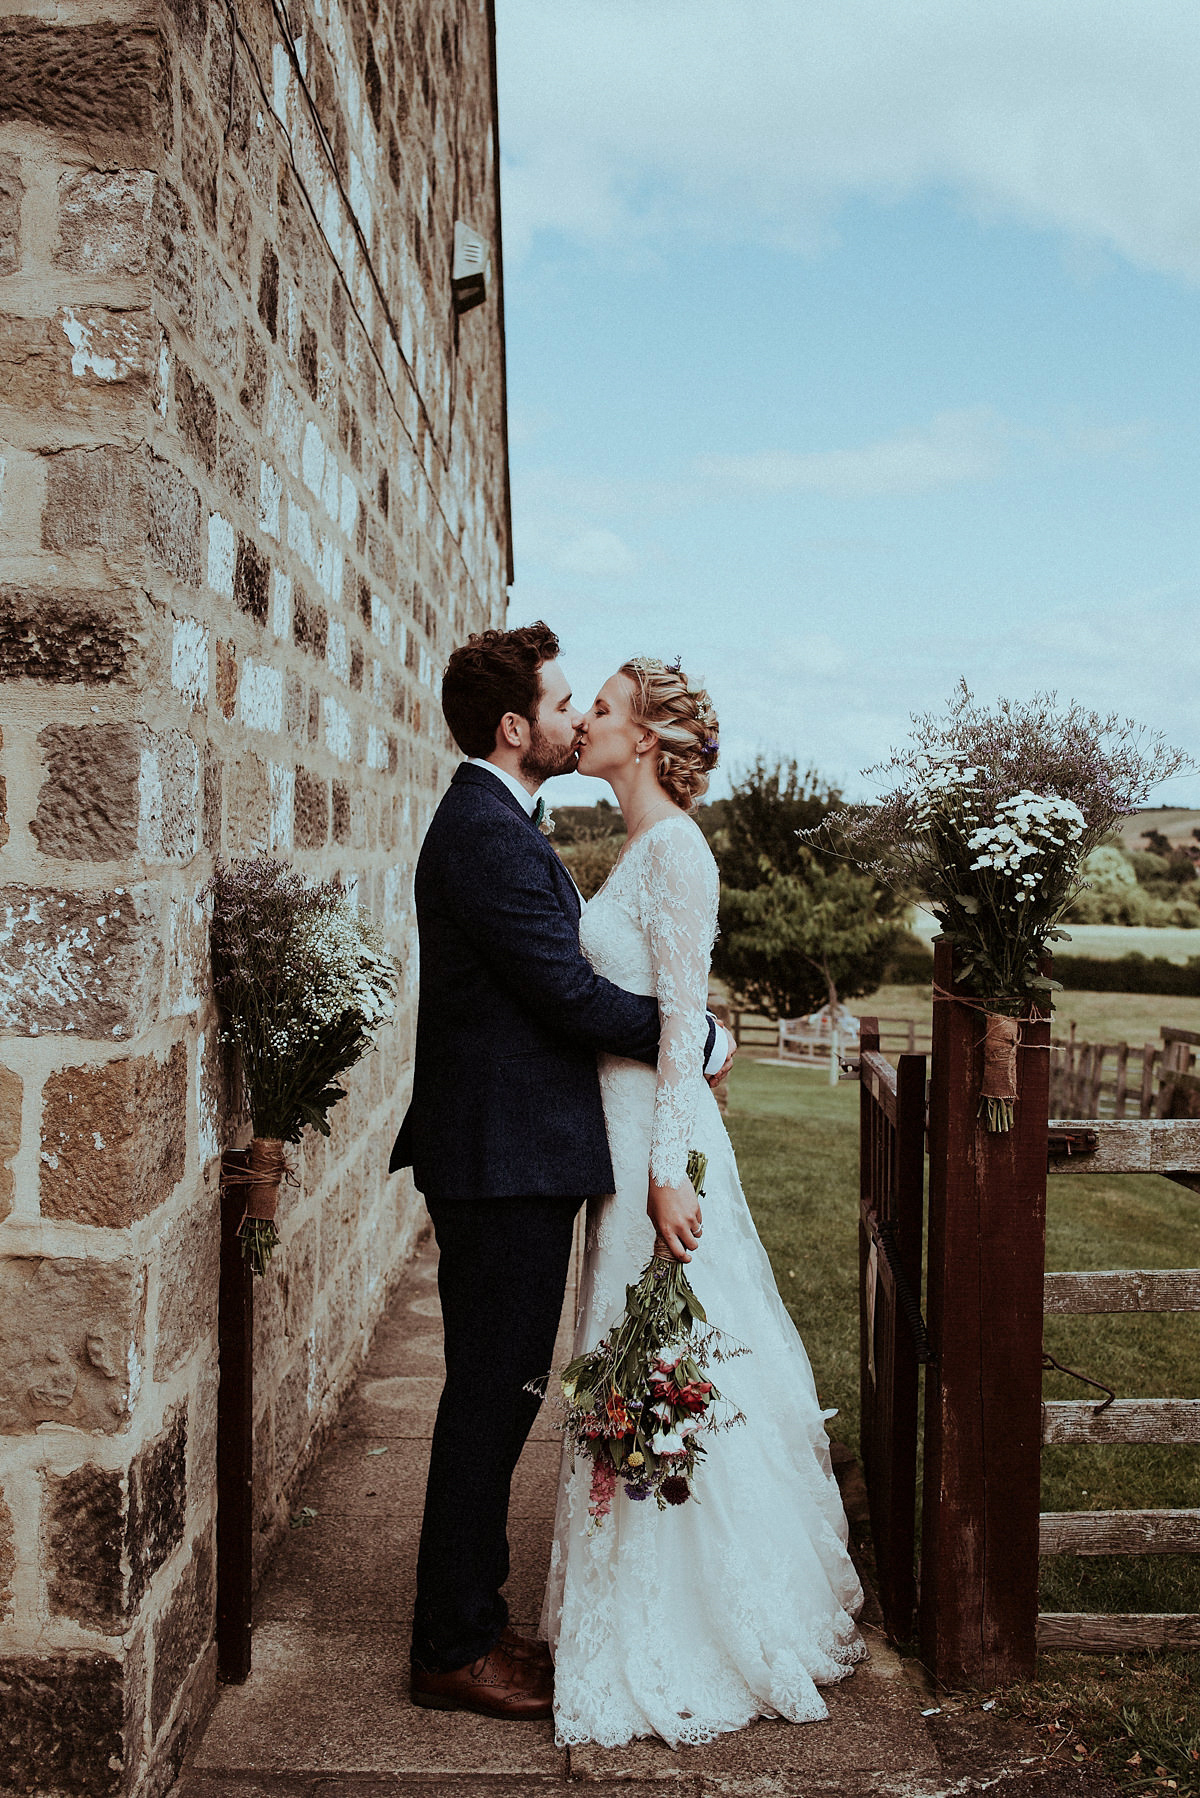 The bride wore an Essense of Australia gown for her colourful and homespun Summer wedding. Photography by Shutter Go Click.